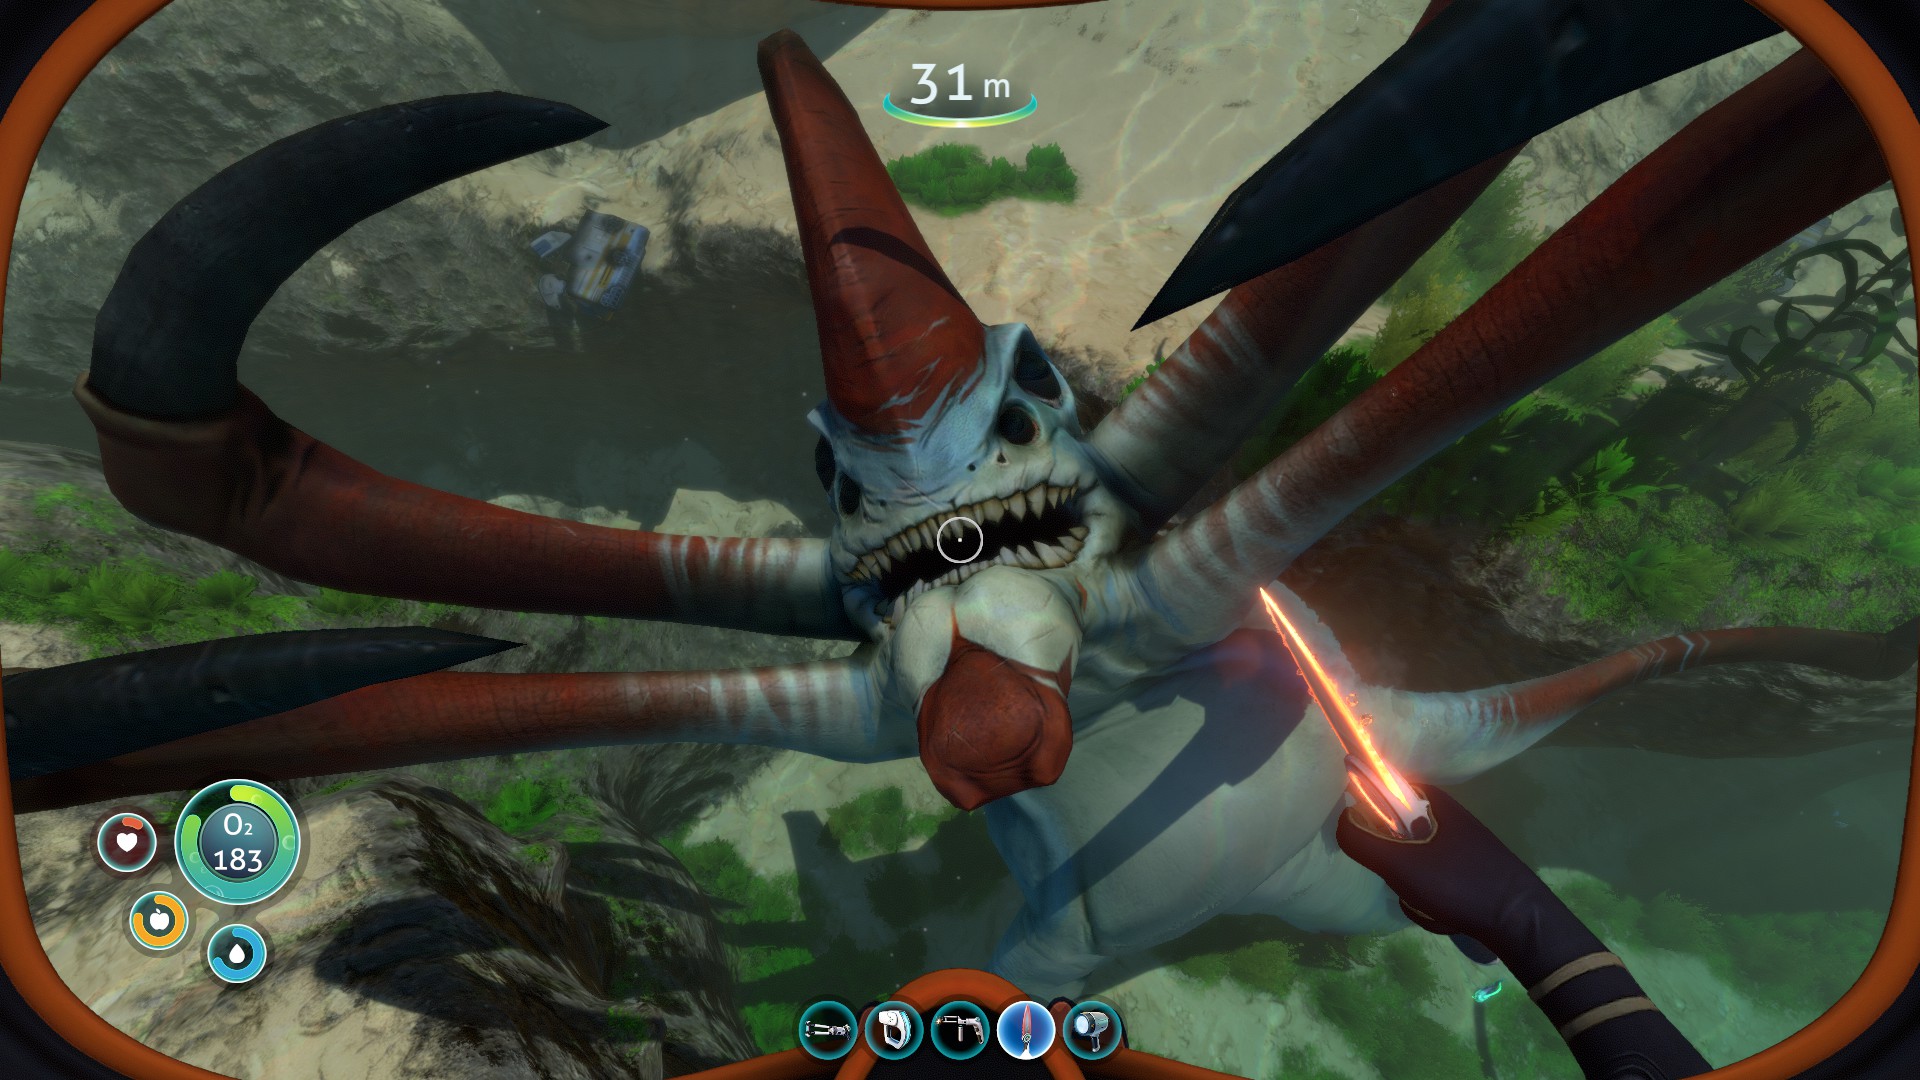 Subnautica: How to Find (& Kill) Reaper Leviathans